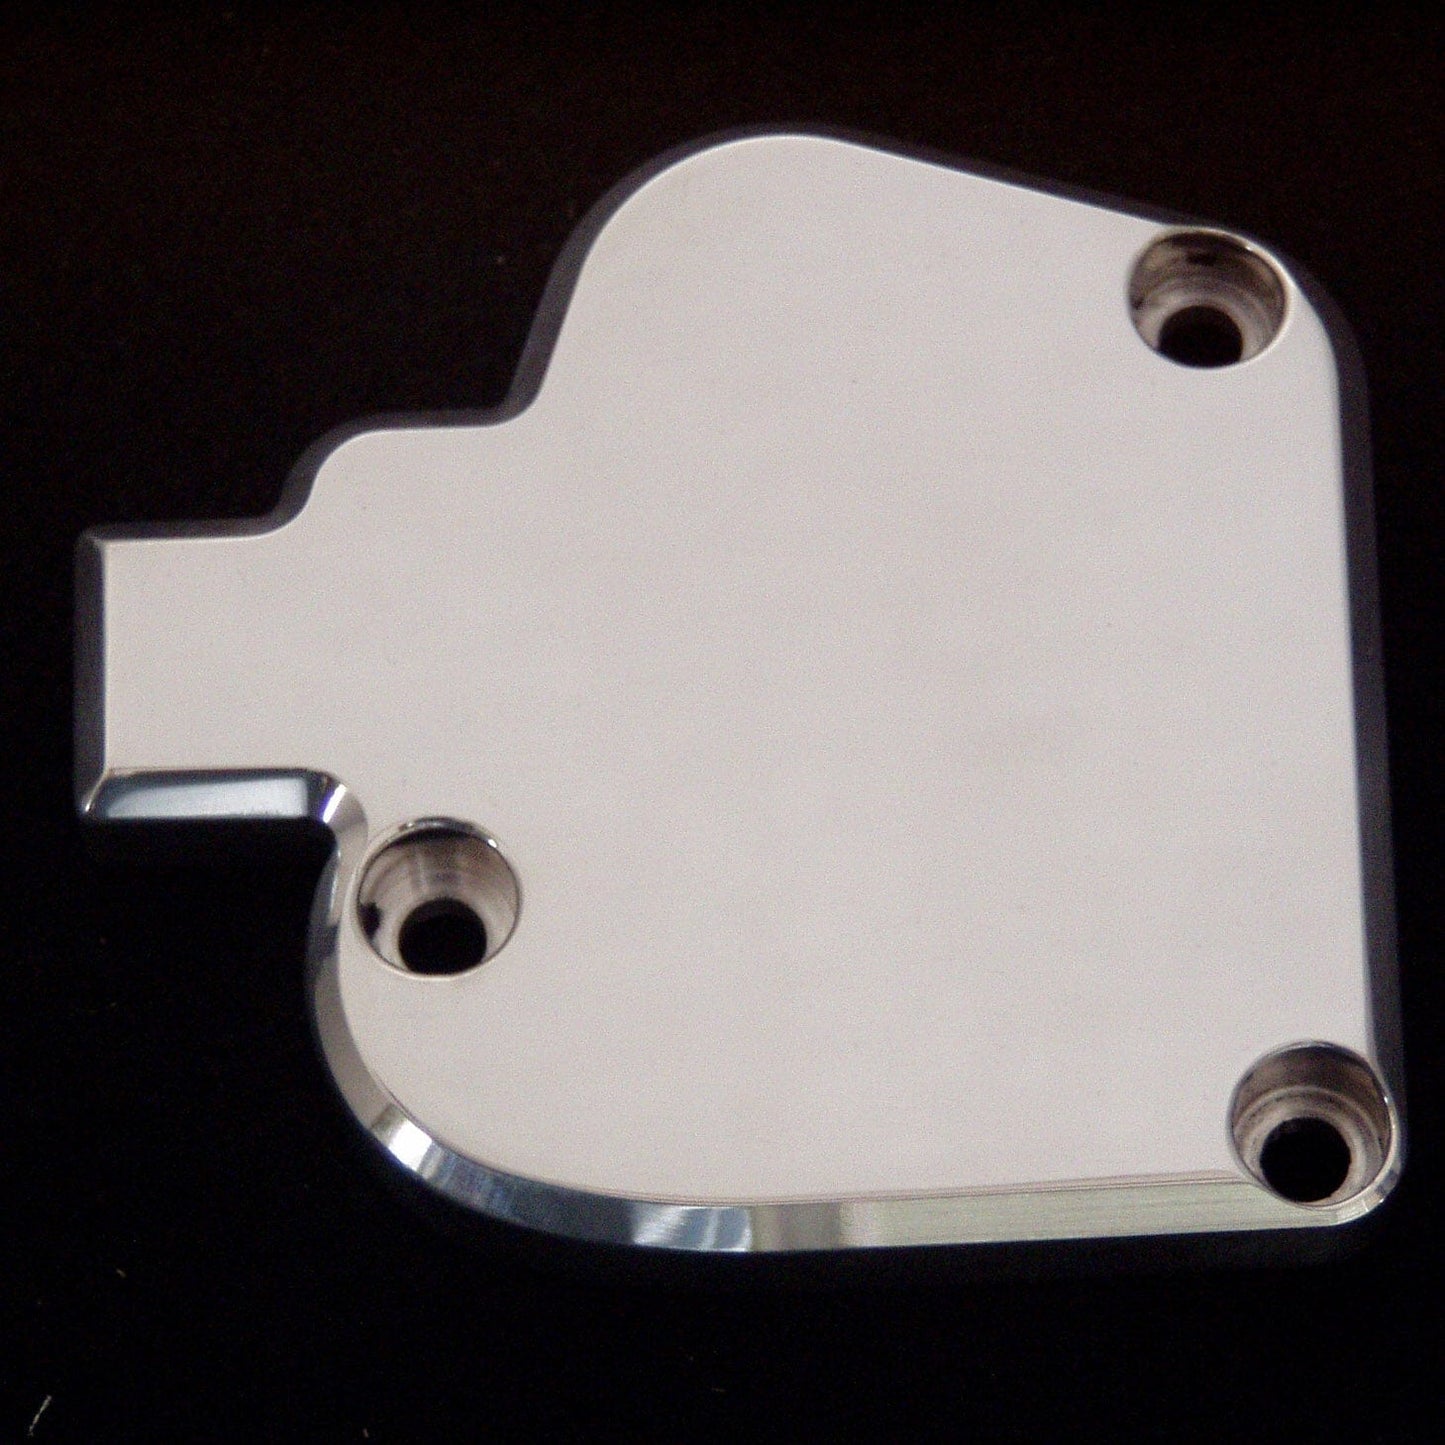 Modquad Throttle Cover, Billet Aluminum, Polished, 2 Styles *NEW*